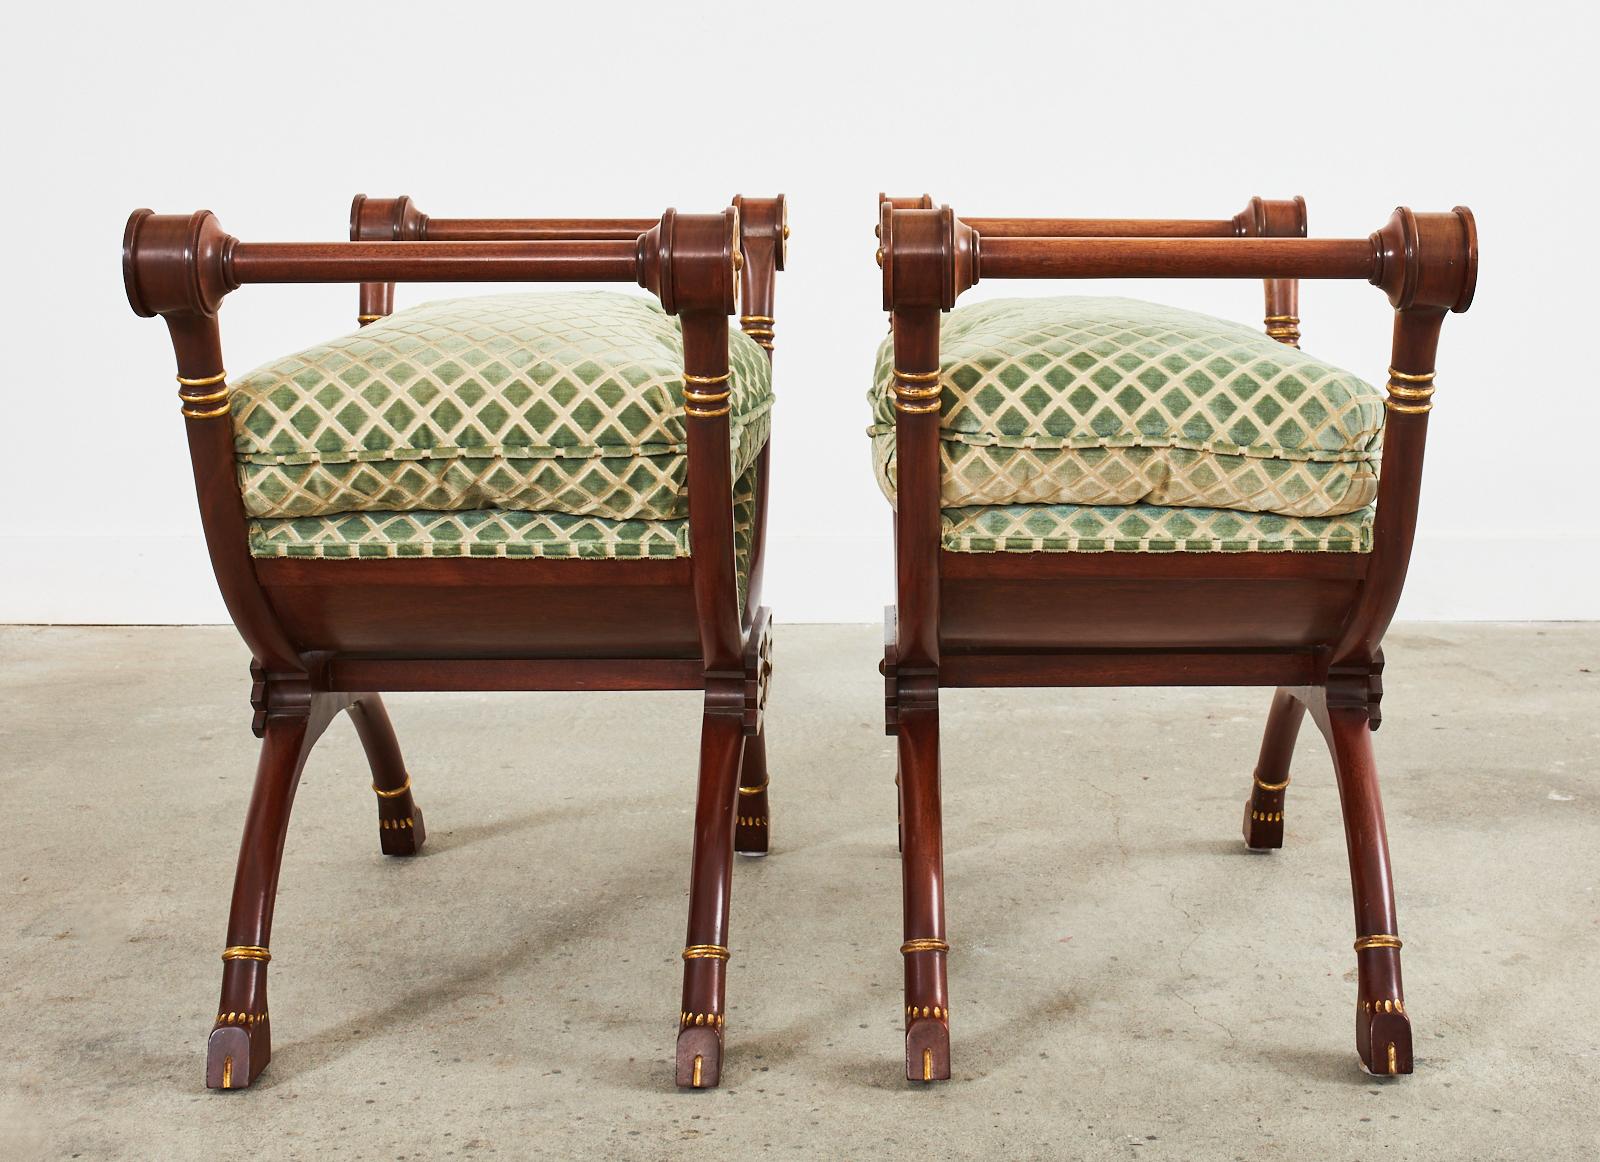 20th Century Pair of Neoclassical Style Savonarola Benches with Curule Legs